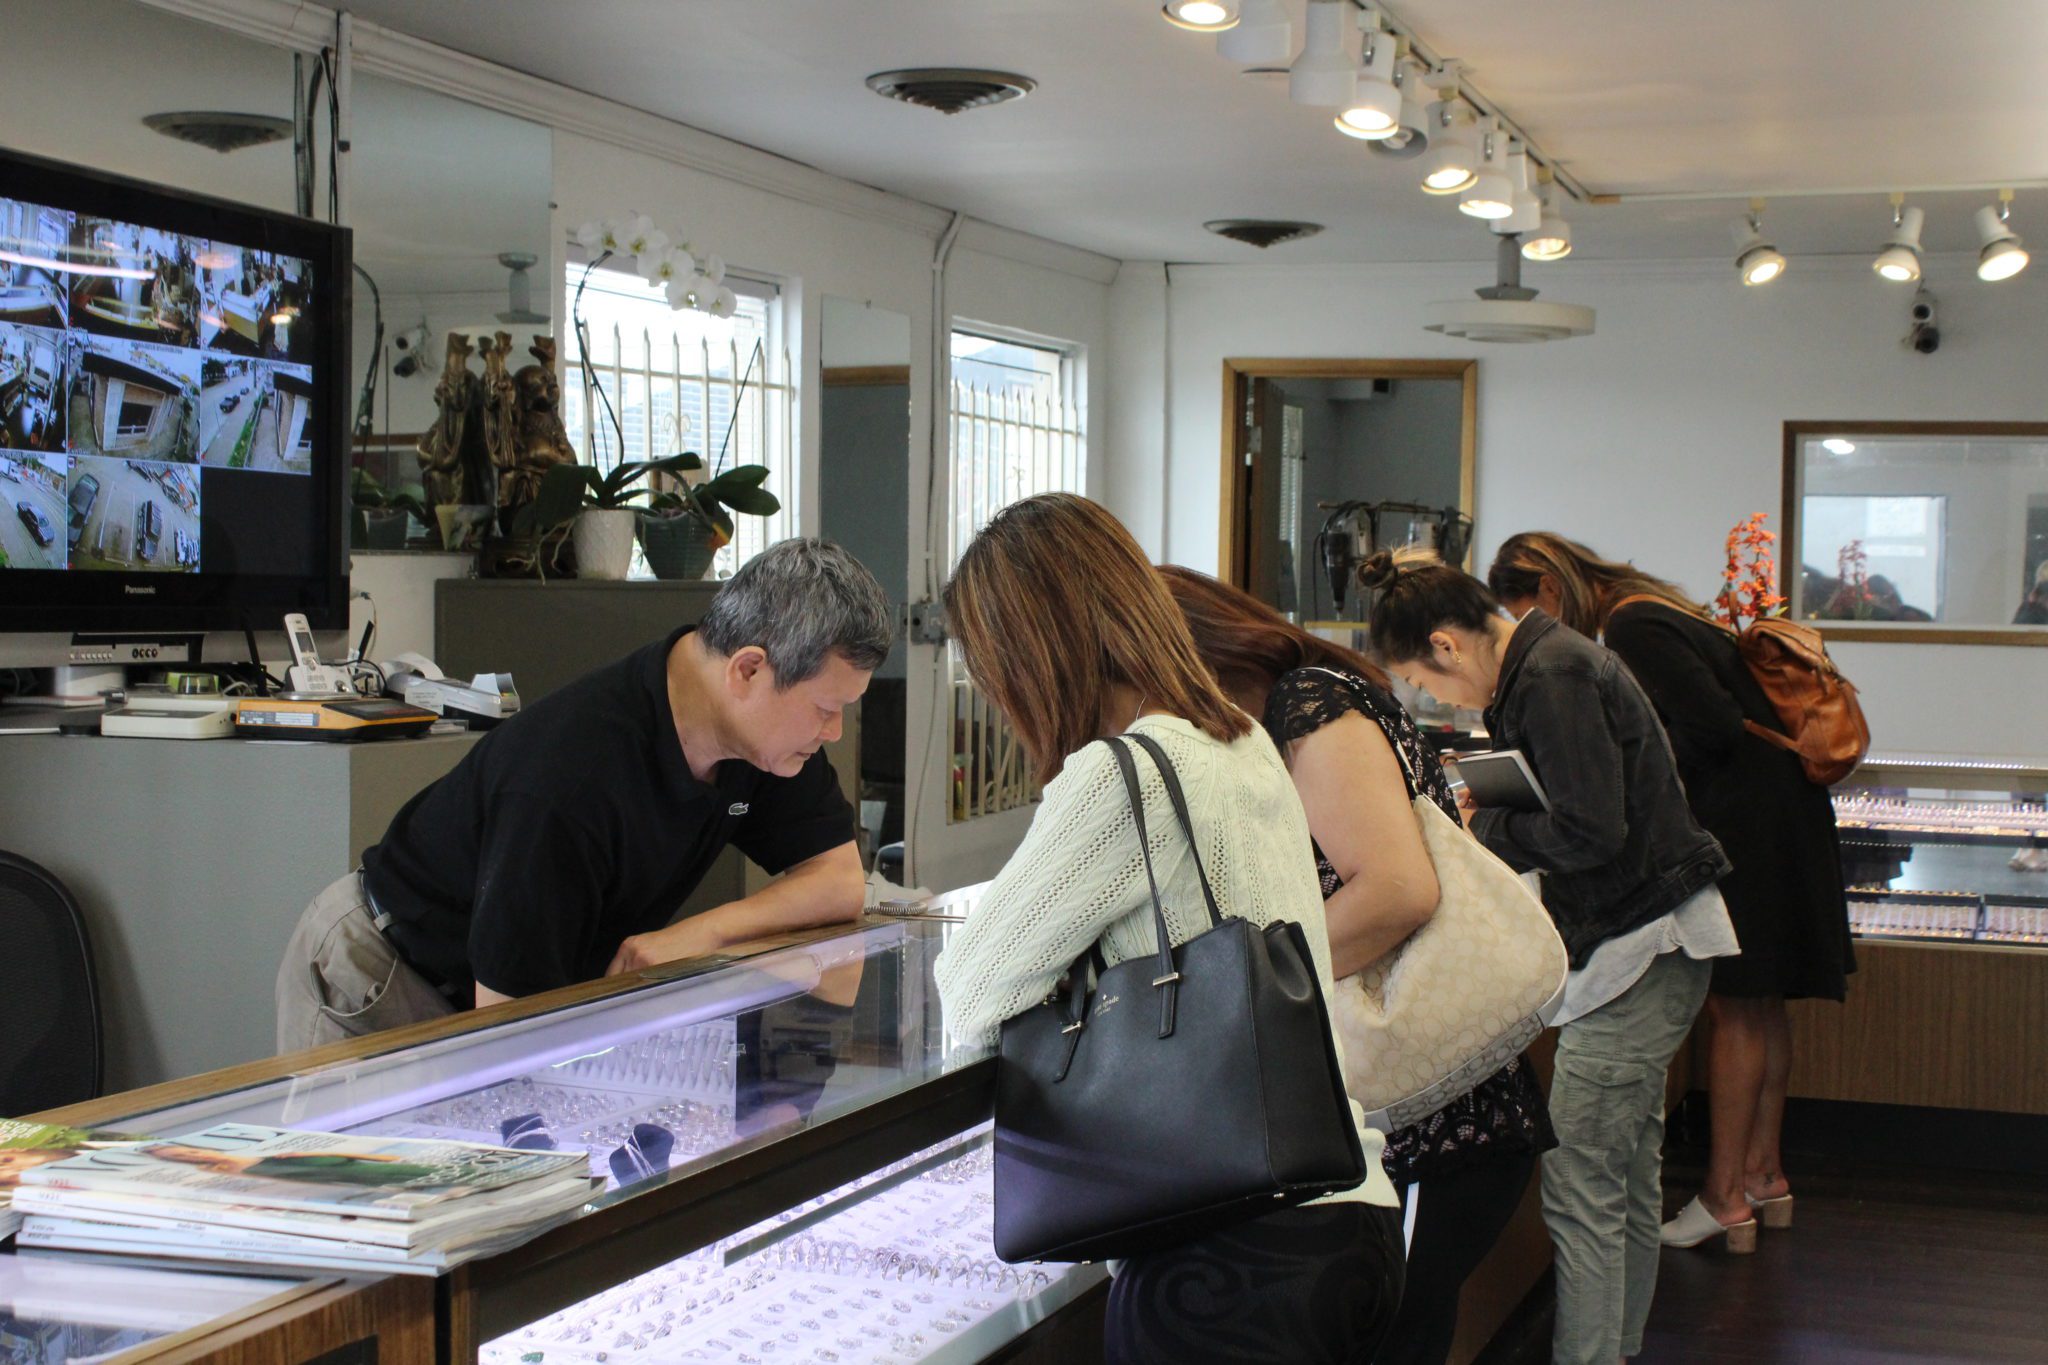 Owner Pham Lang helping customers at Bich Kieu Jewelry